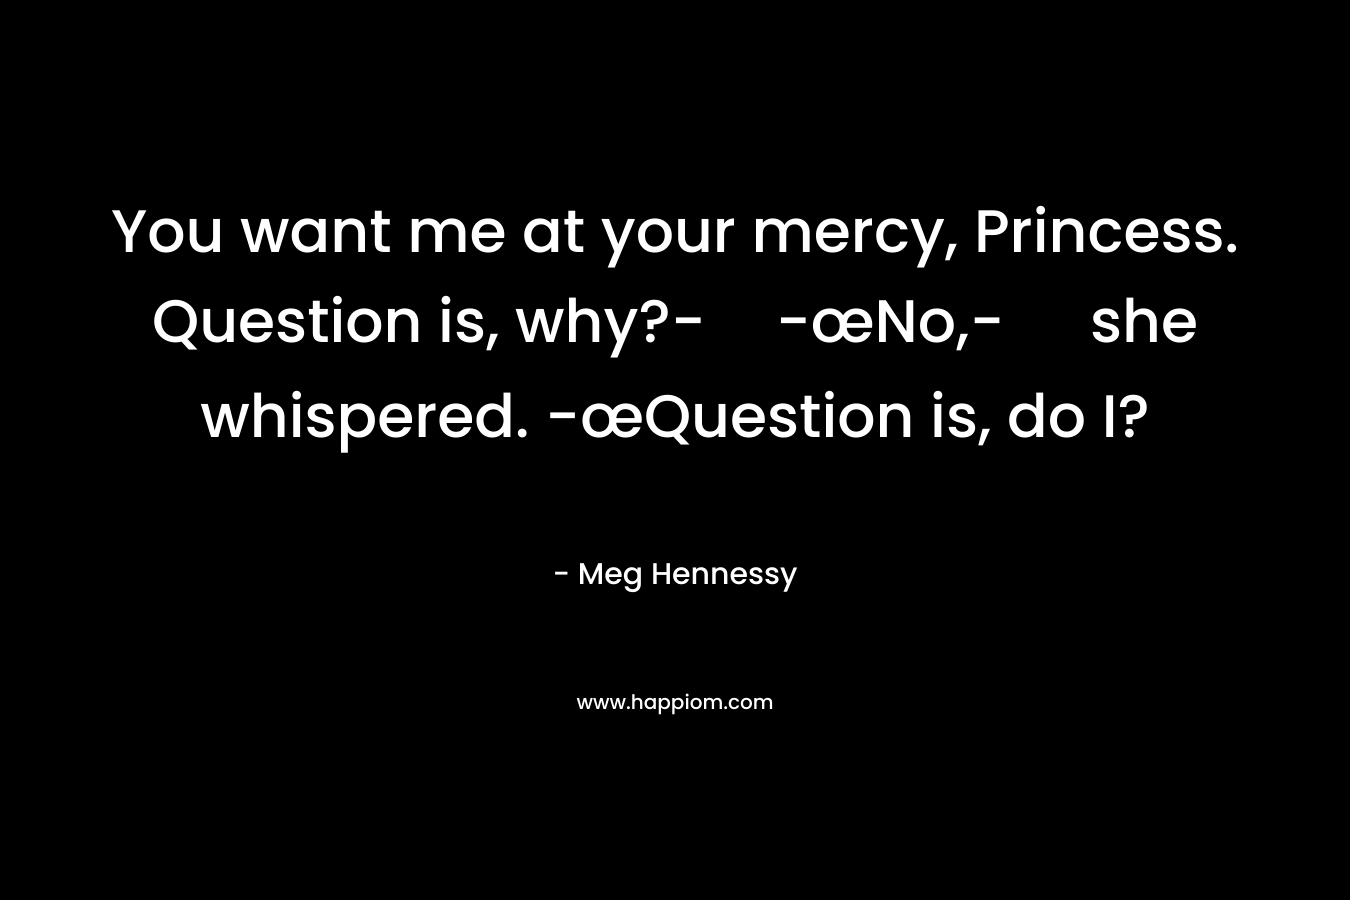 You want me at your mercy, Princess. Question is, why?--œNo,- she whispered. -œQuestion is, do I? – Meg Hennessy